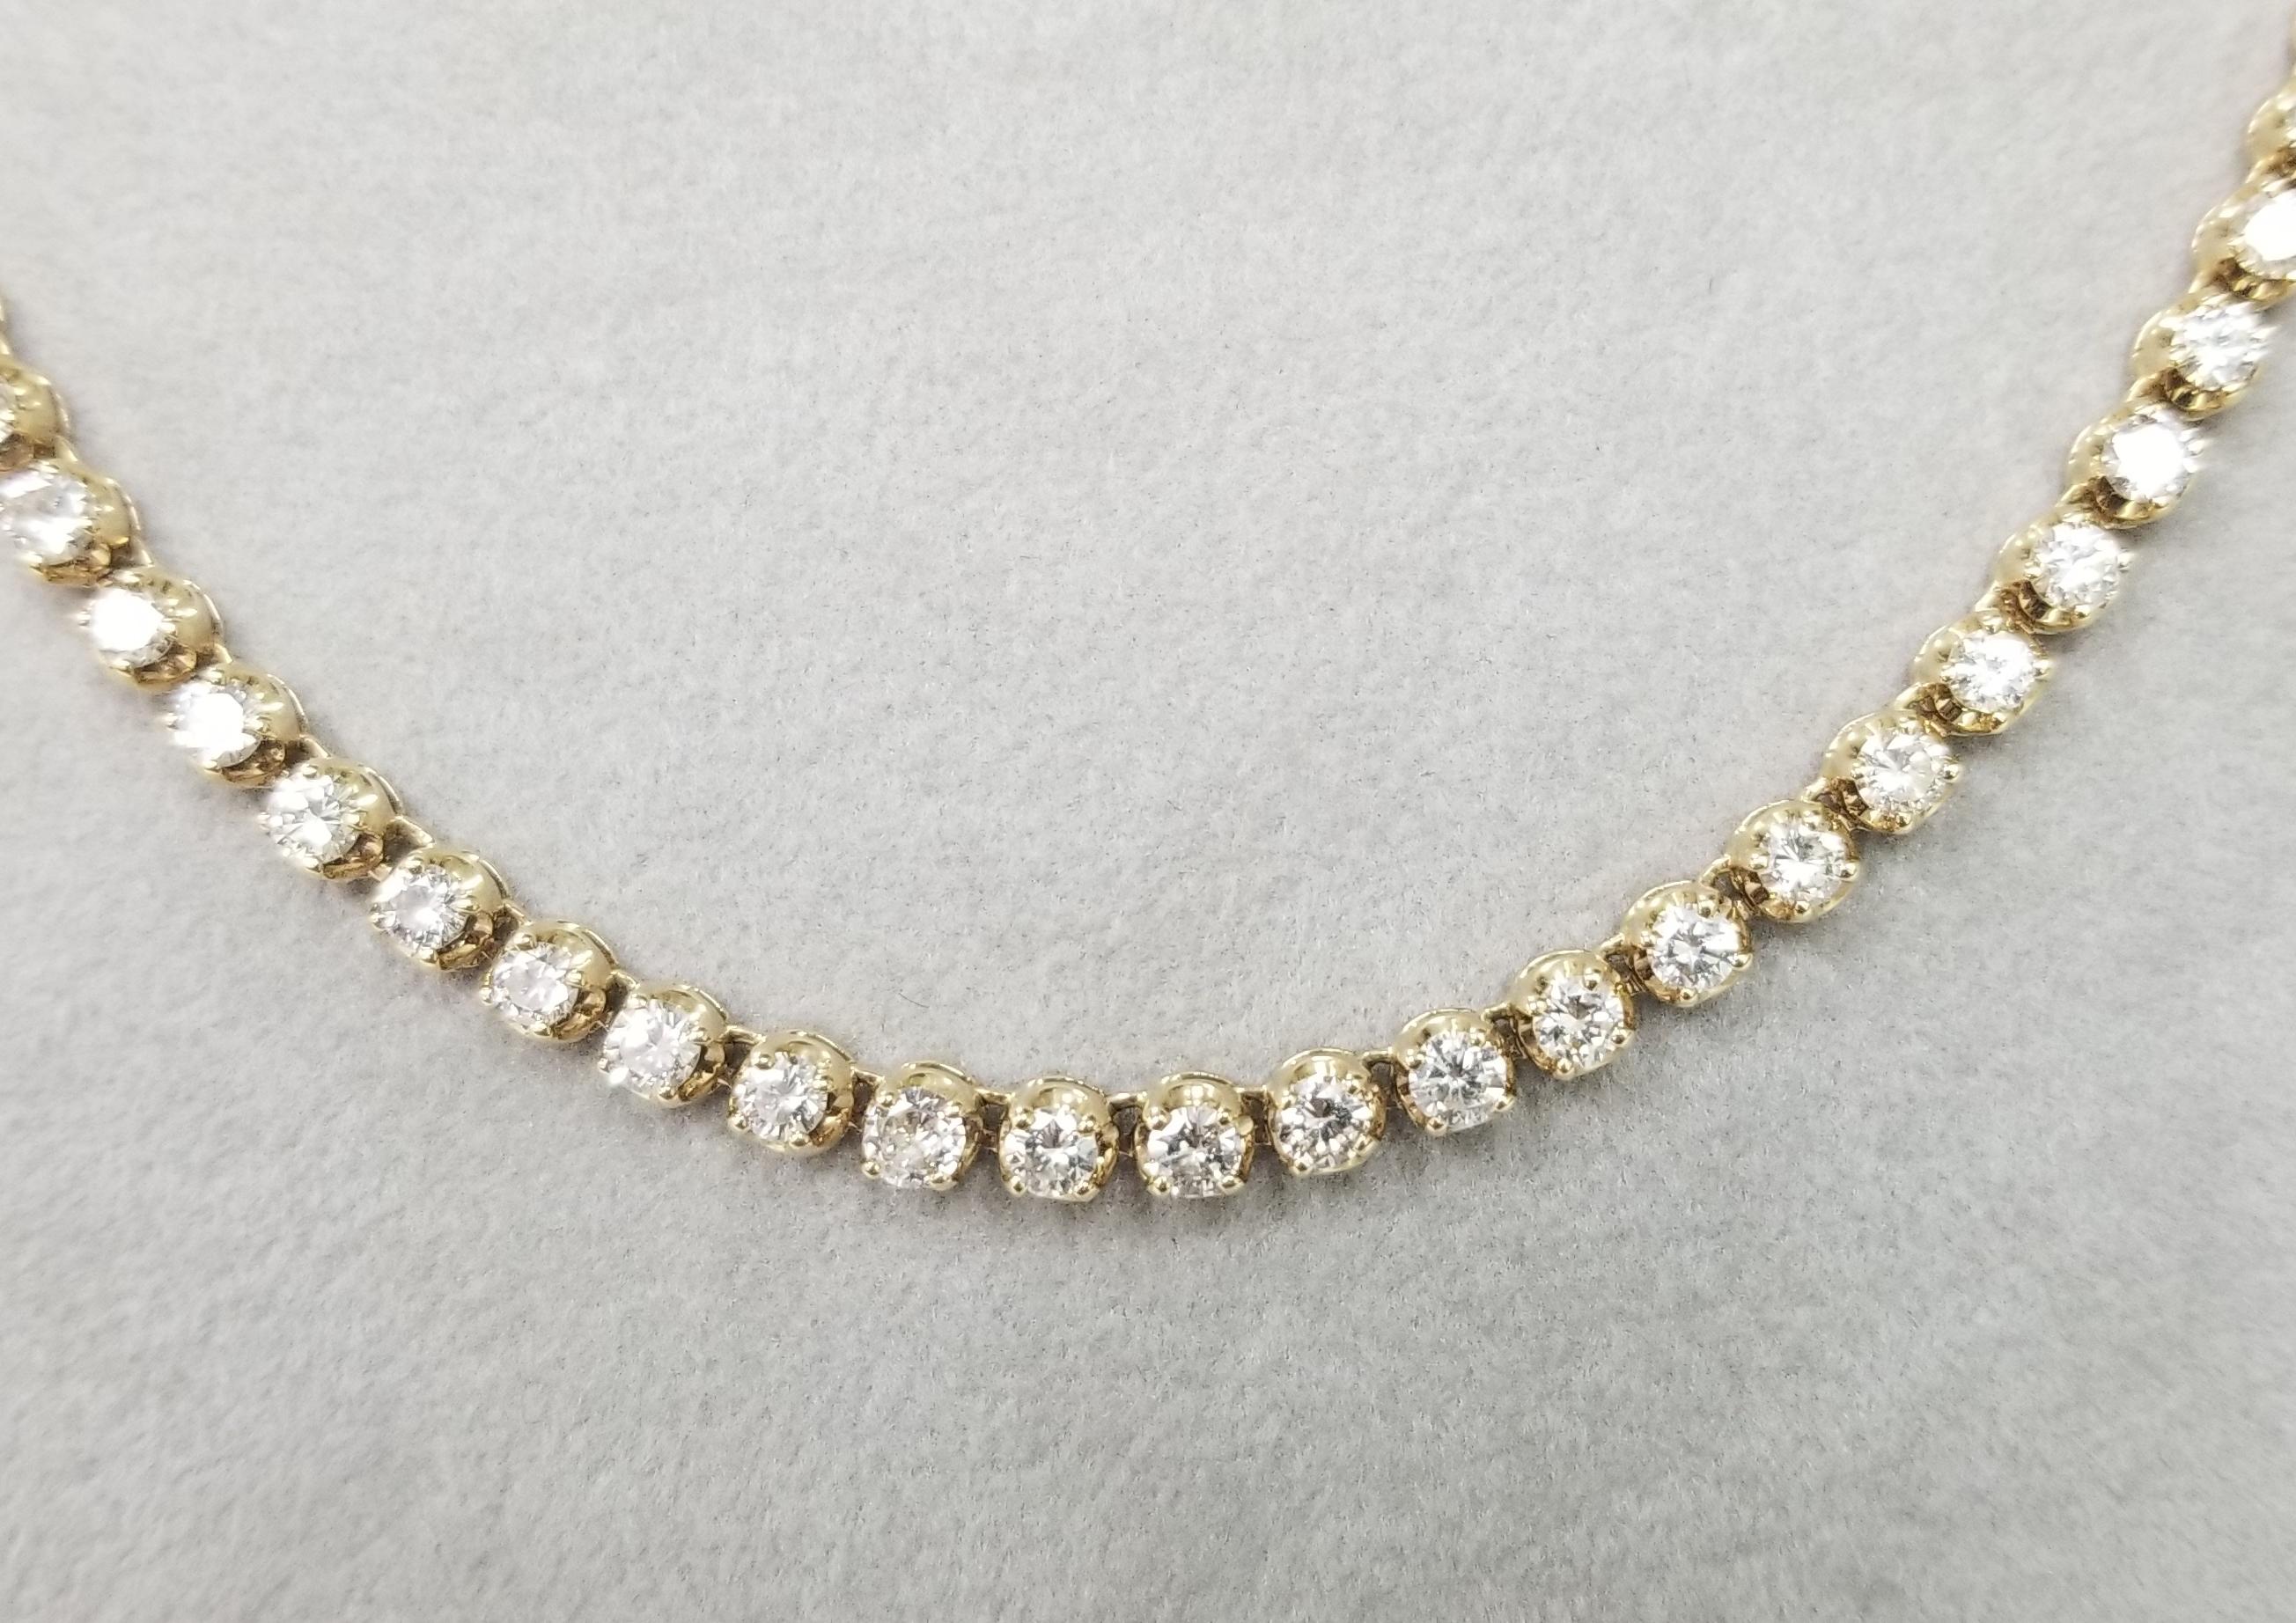 14 Karat Yellow Gold 4 Prong Diamond Necklace 11.41 Carat with plunger and safety clasp, containing 
 Specifications:
    main stone: ROUND CUT DIAMONDS
    diamonds: 97 PIECES
    carat total weight: 11.41cts.
    color: G
    clarity: VS2
   